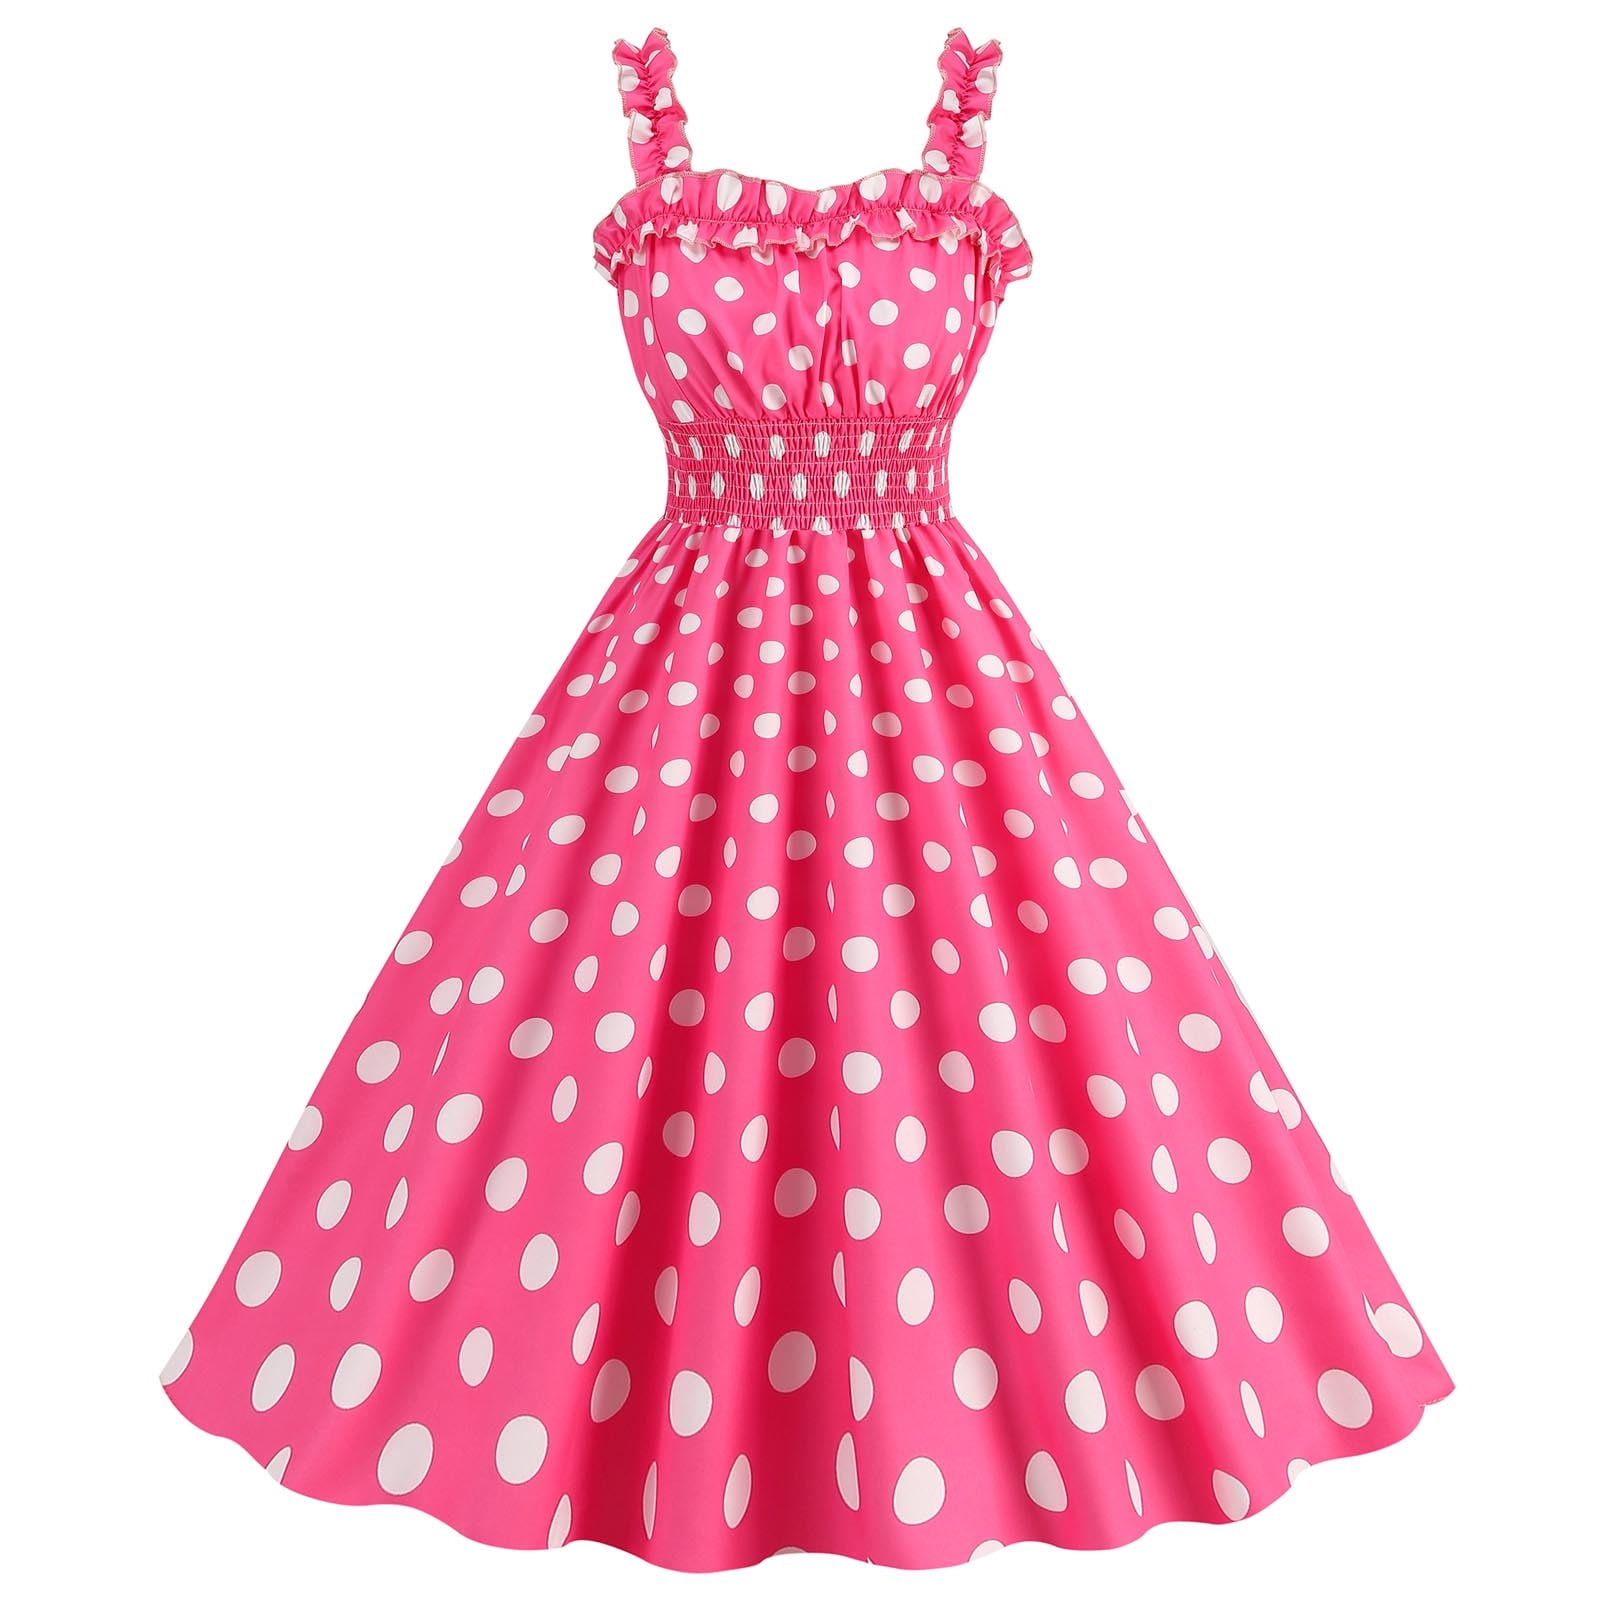 Pink Gingham Dress for Women Vintage Rockabilly 1950s Spaghetti Strap  A-line Swing Midi Cocktail Party Pageant Dress on Clearance 